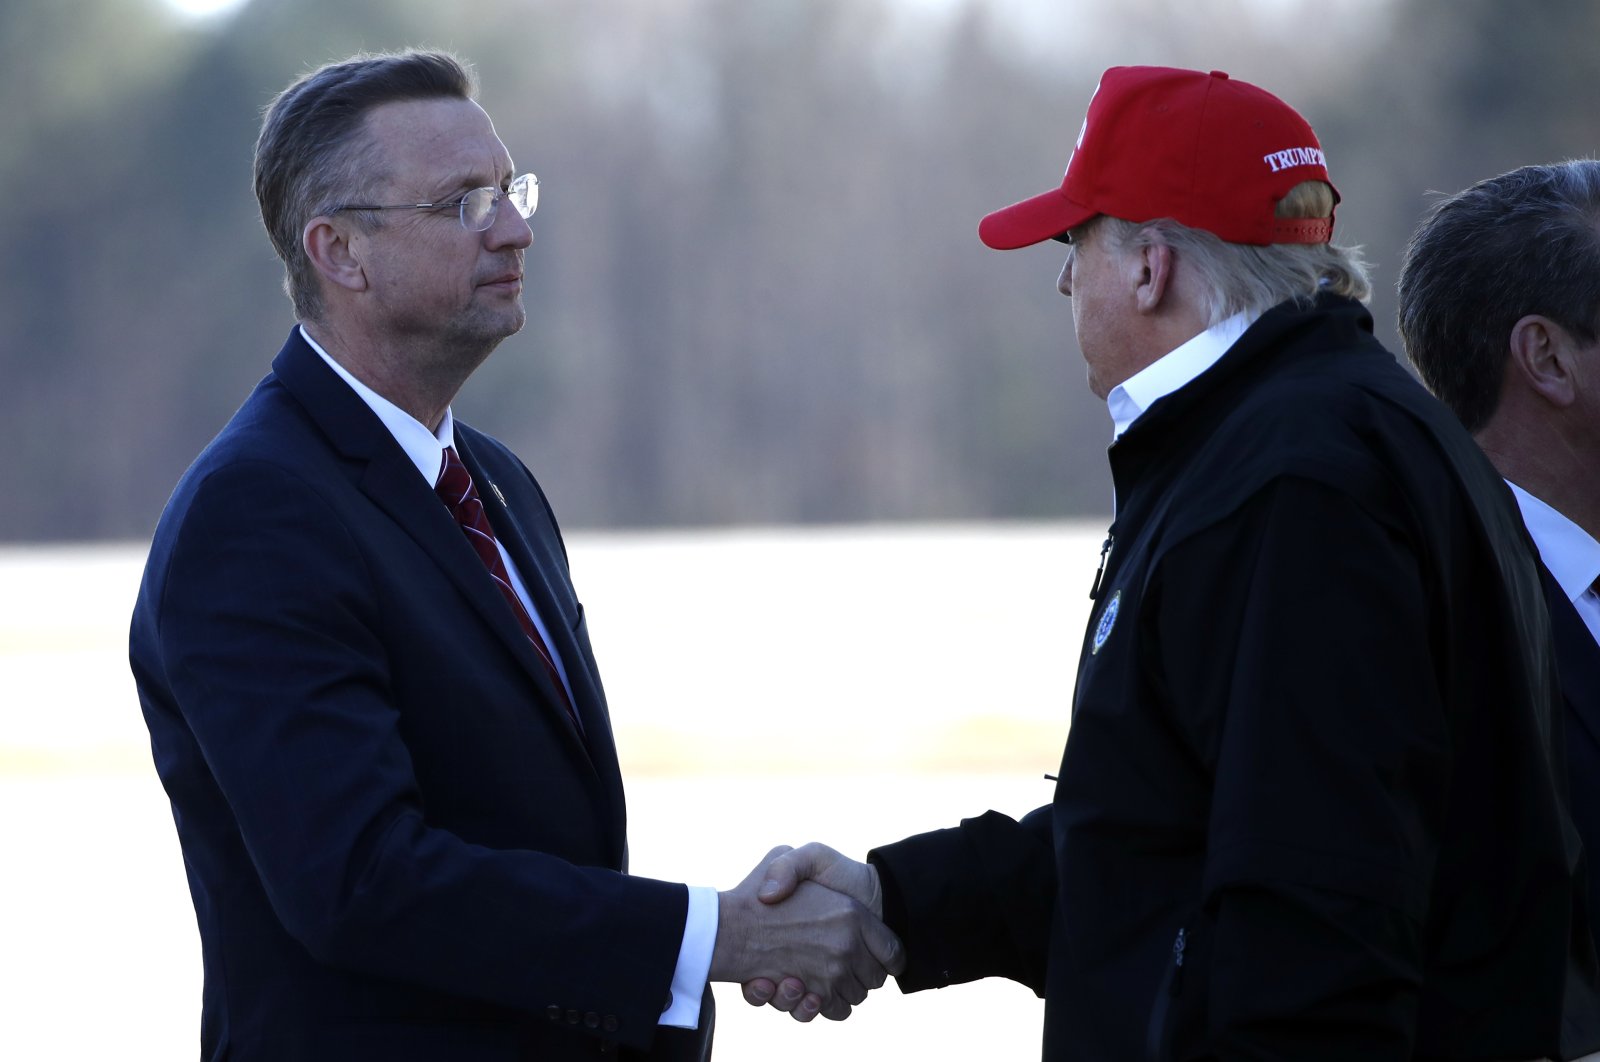 President Donald Trump greets Rep. Doug Collins, R-Ga., as he arrives on Air Force One Friday, March 6, 2020, at Dobbins Air Reserve Base in Marietta, Ga. (AP Photo)